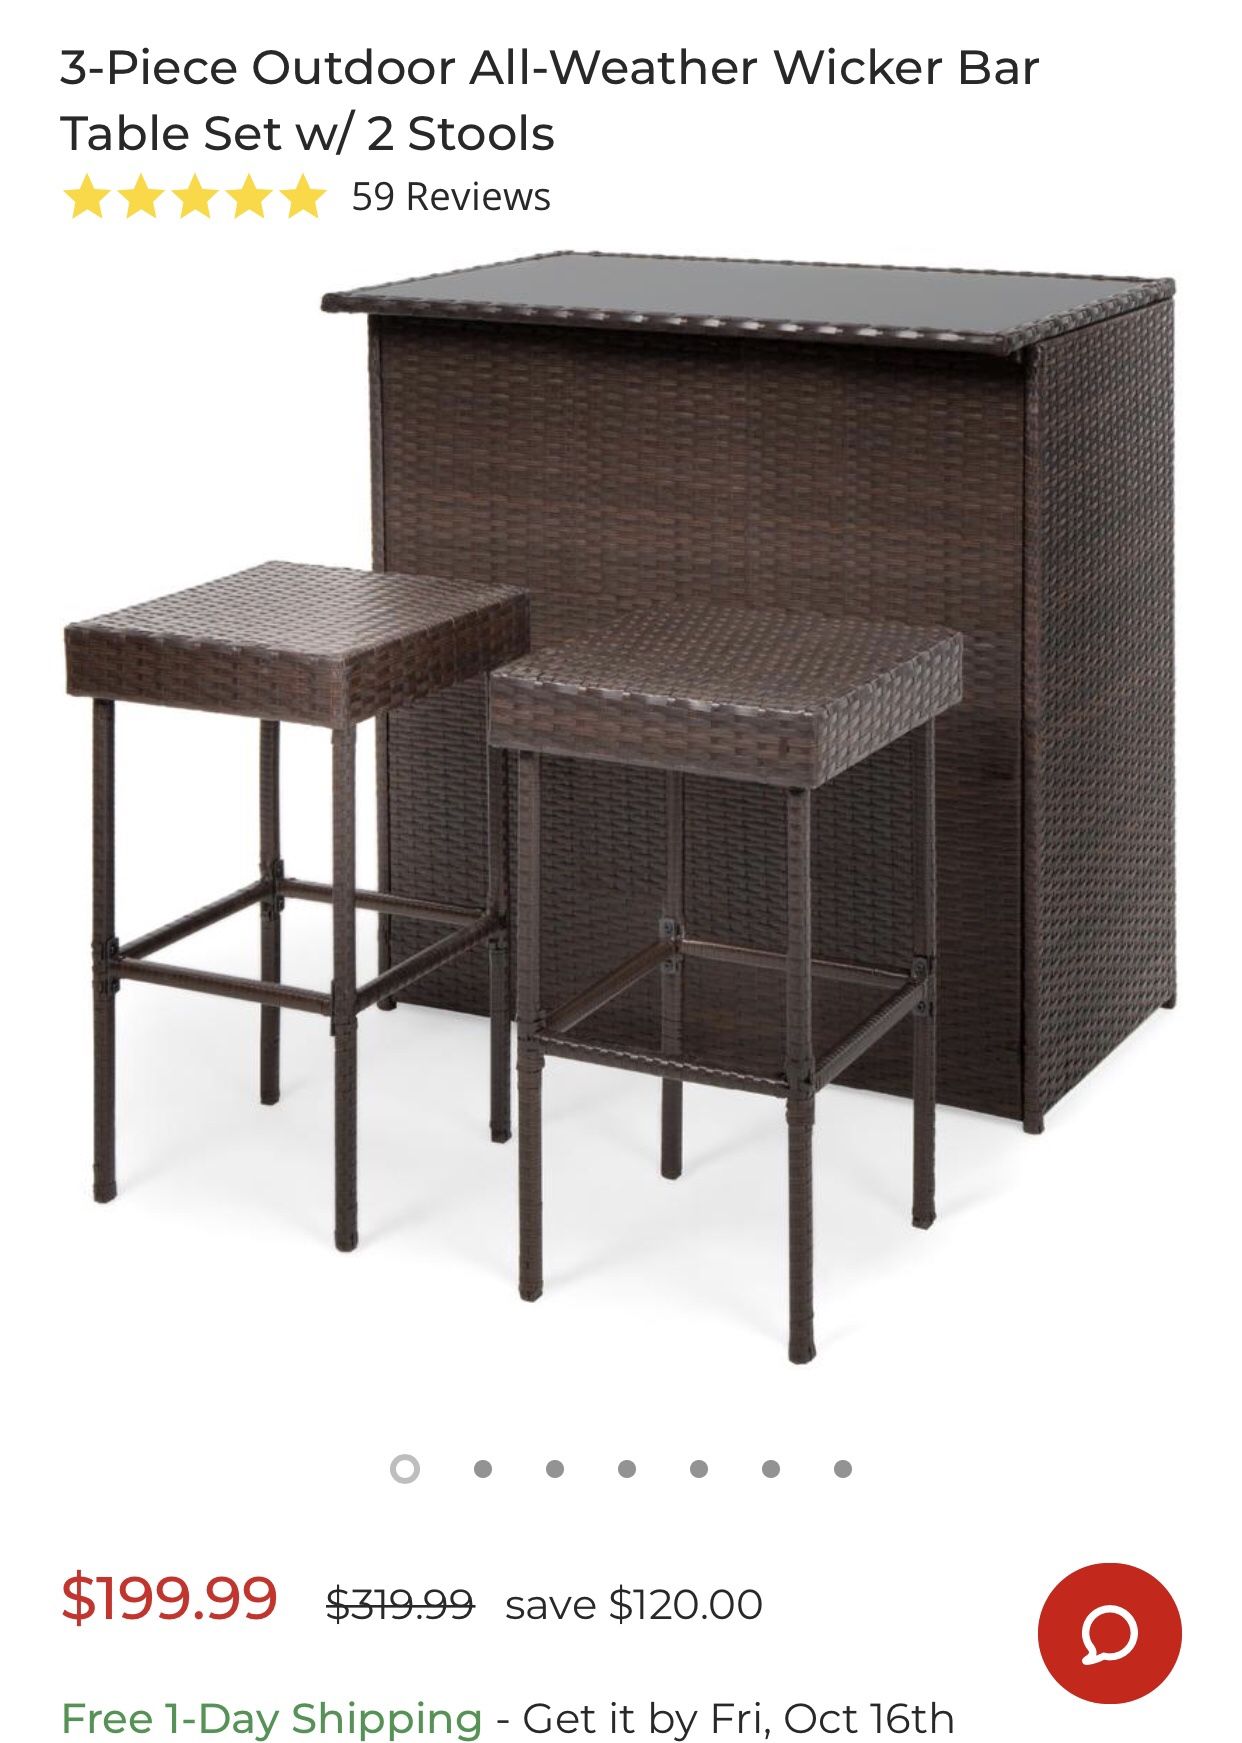 Brand new 3-Piece Outdoor All-Weather Wicker Bar Table Set w/ 2 Stools